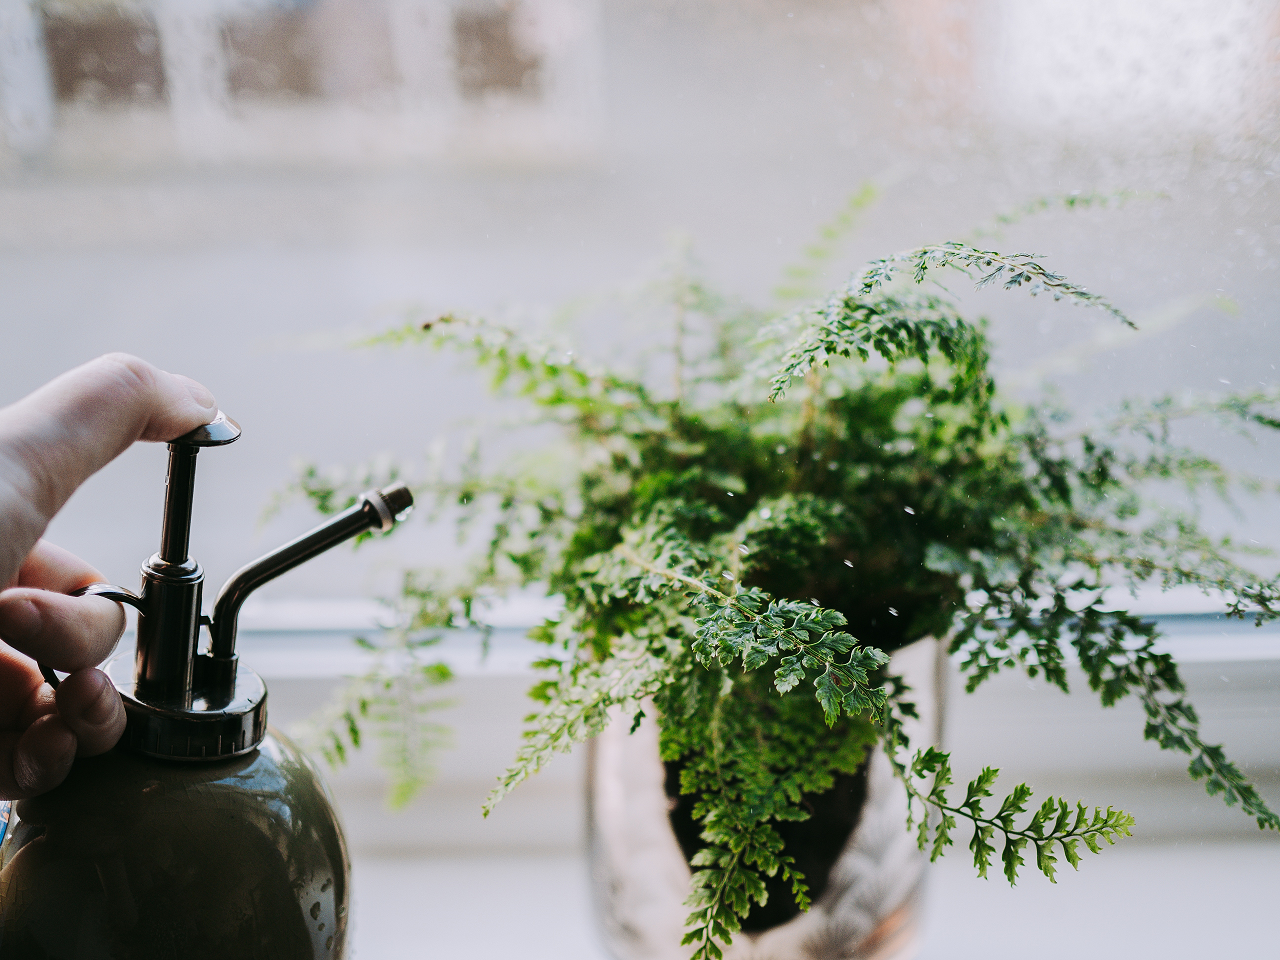 Image of a person watering a fern plant.